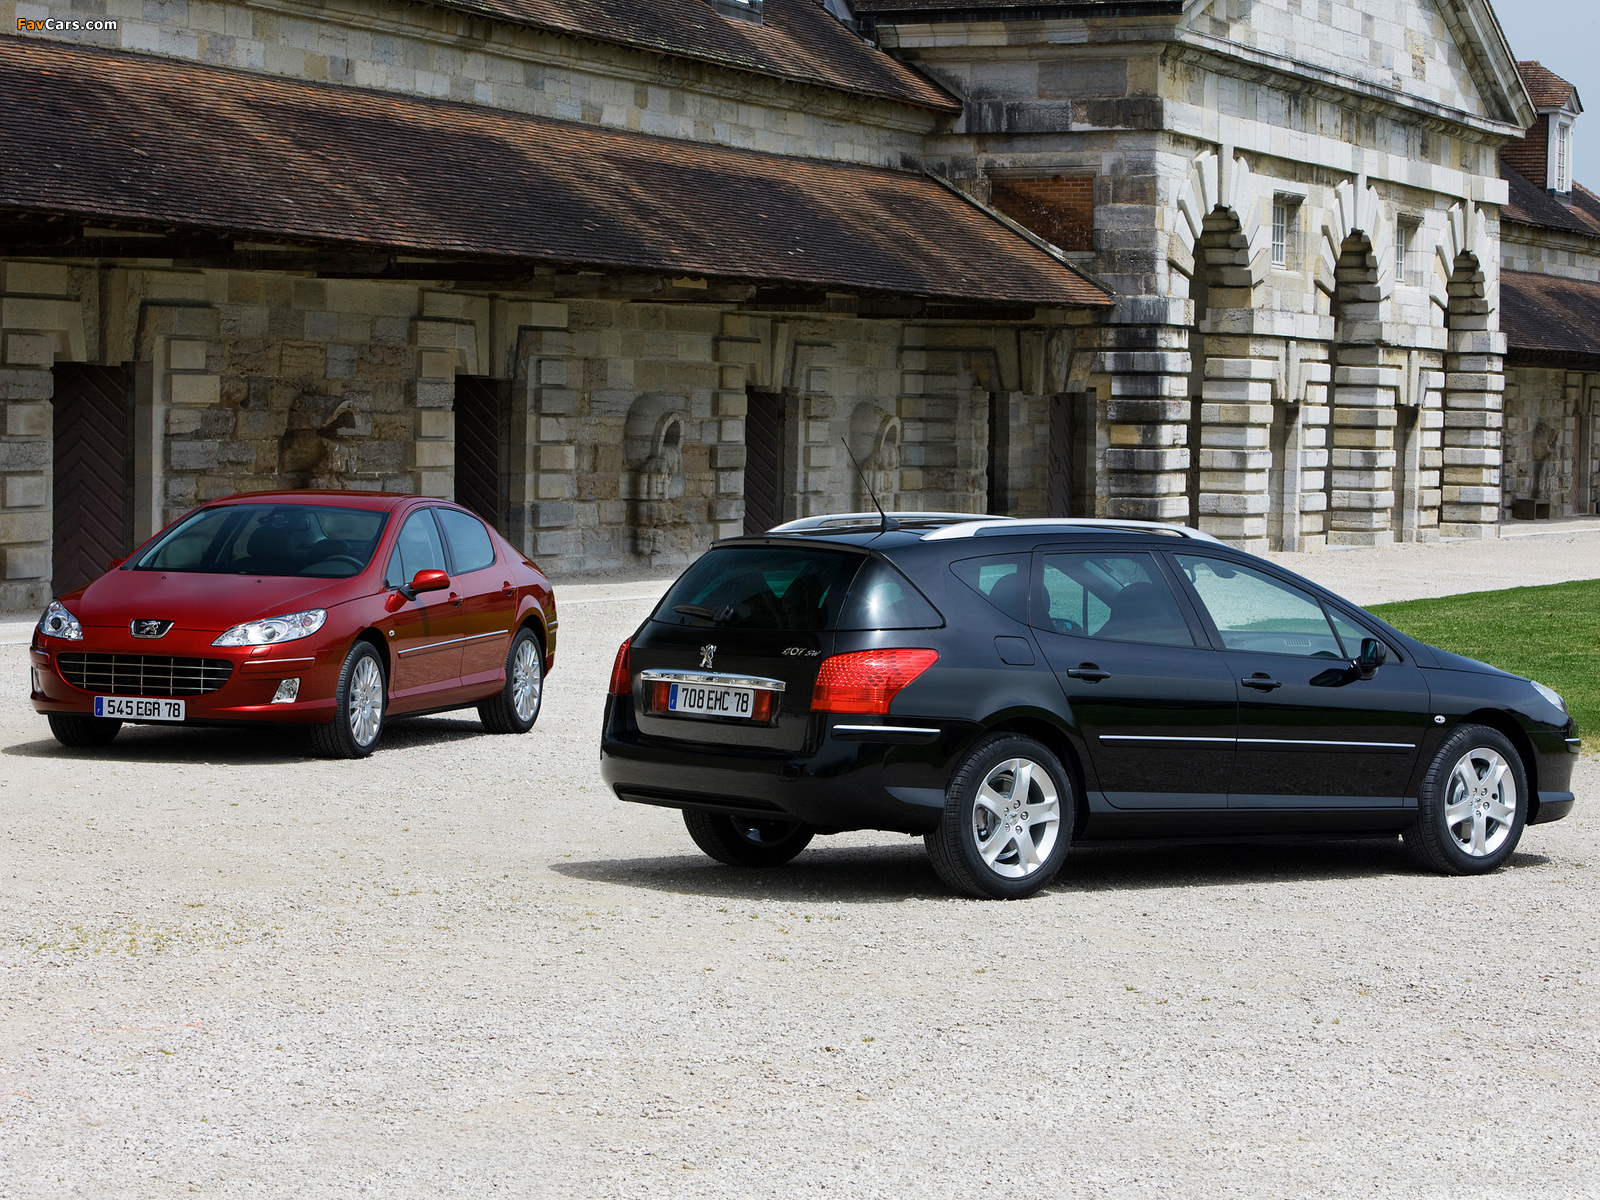 Images of Peugeot 407 (1600 x 1200)